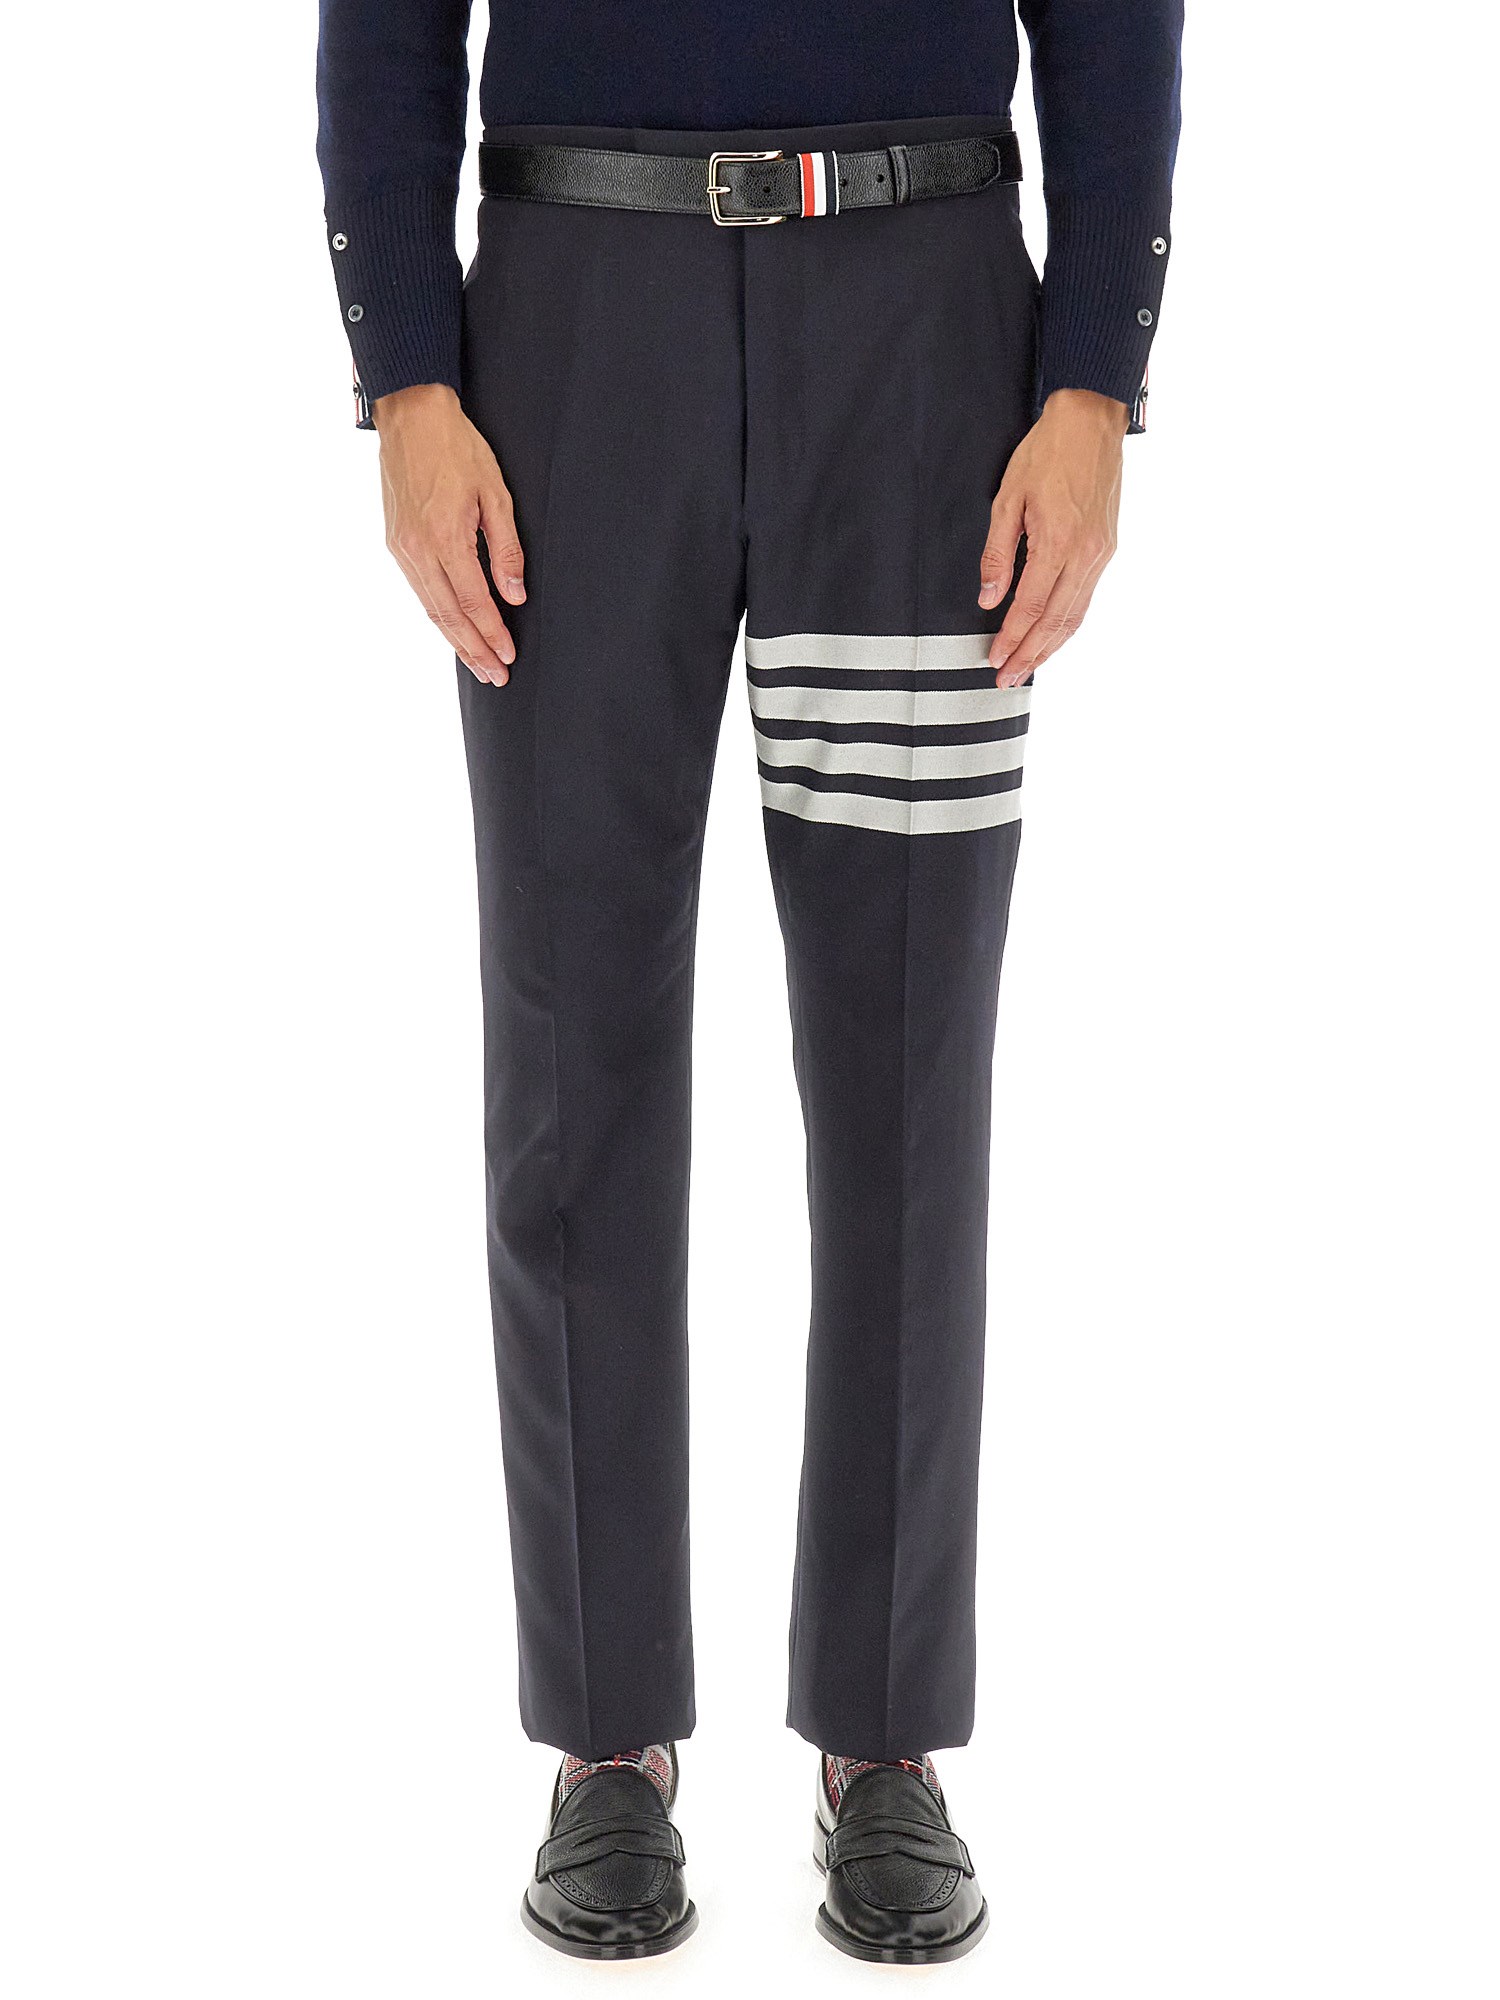 thom browne classic pants with martingale